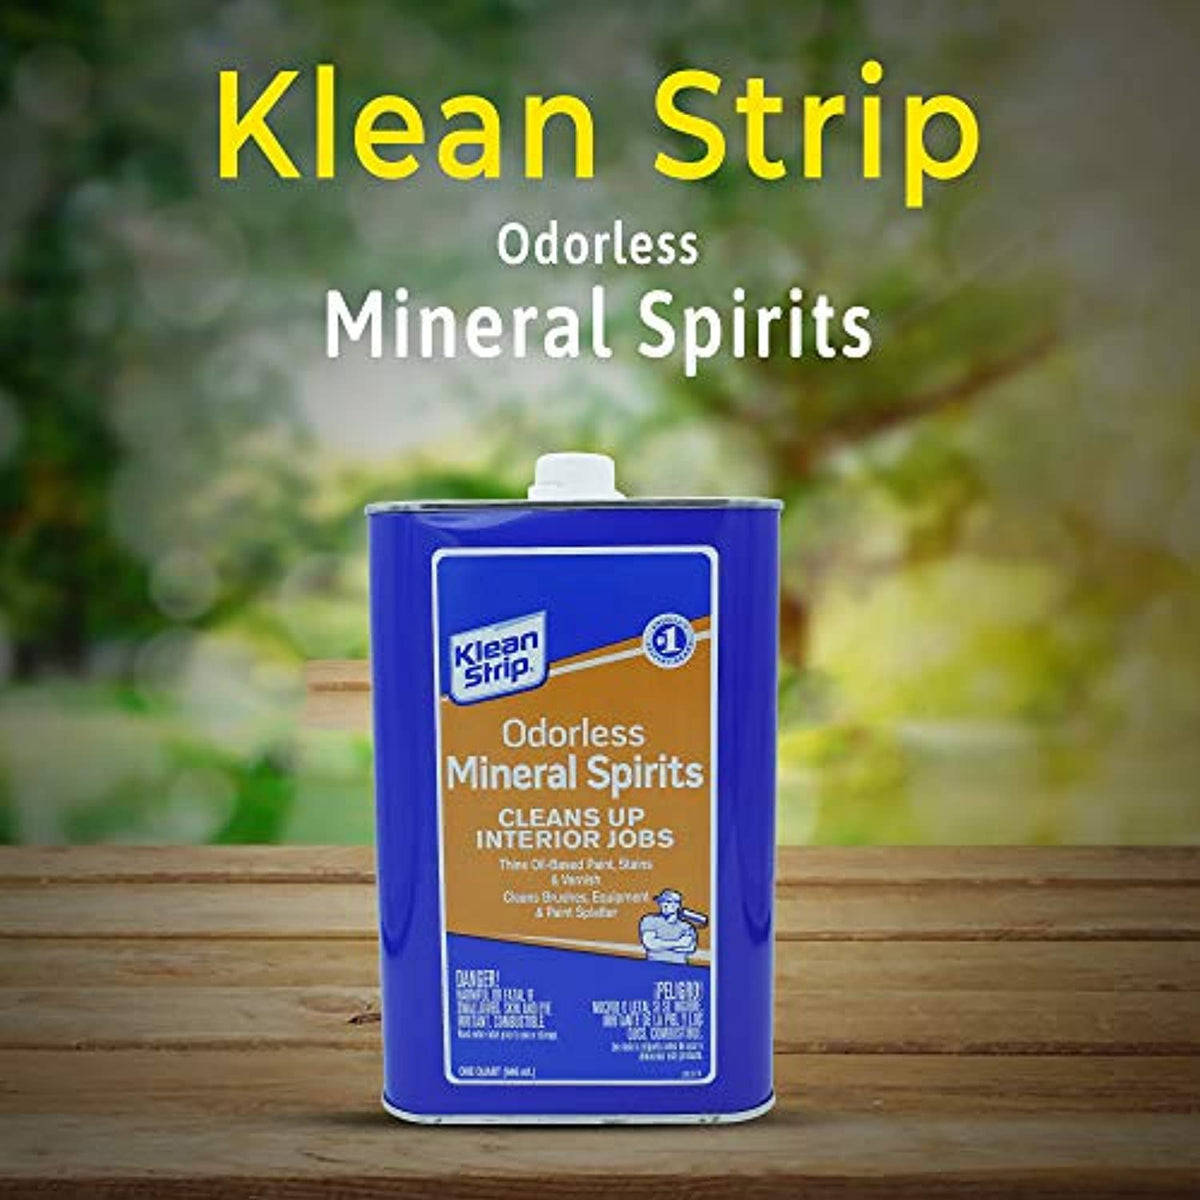 Klean Strip Green Odorless Mineral Spirits with Chemical Resistant